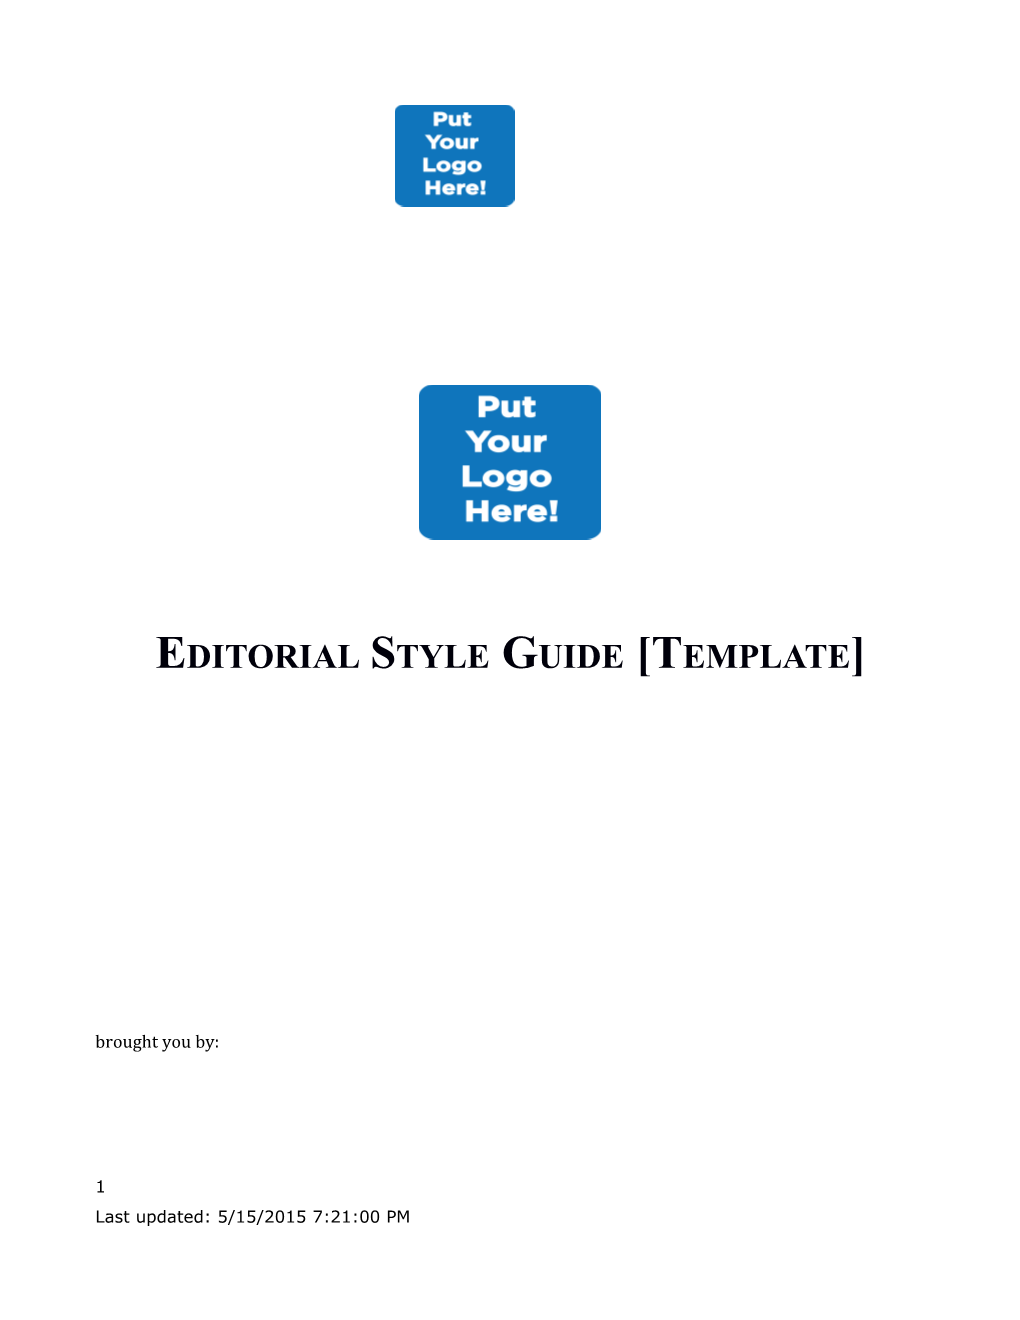 Editorial Style Guide Template